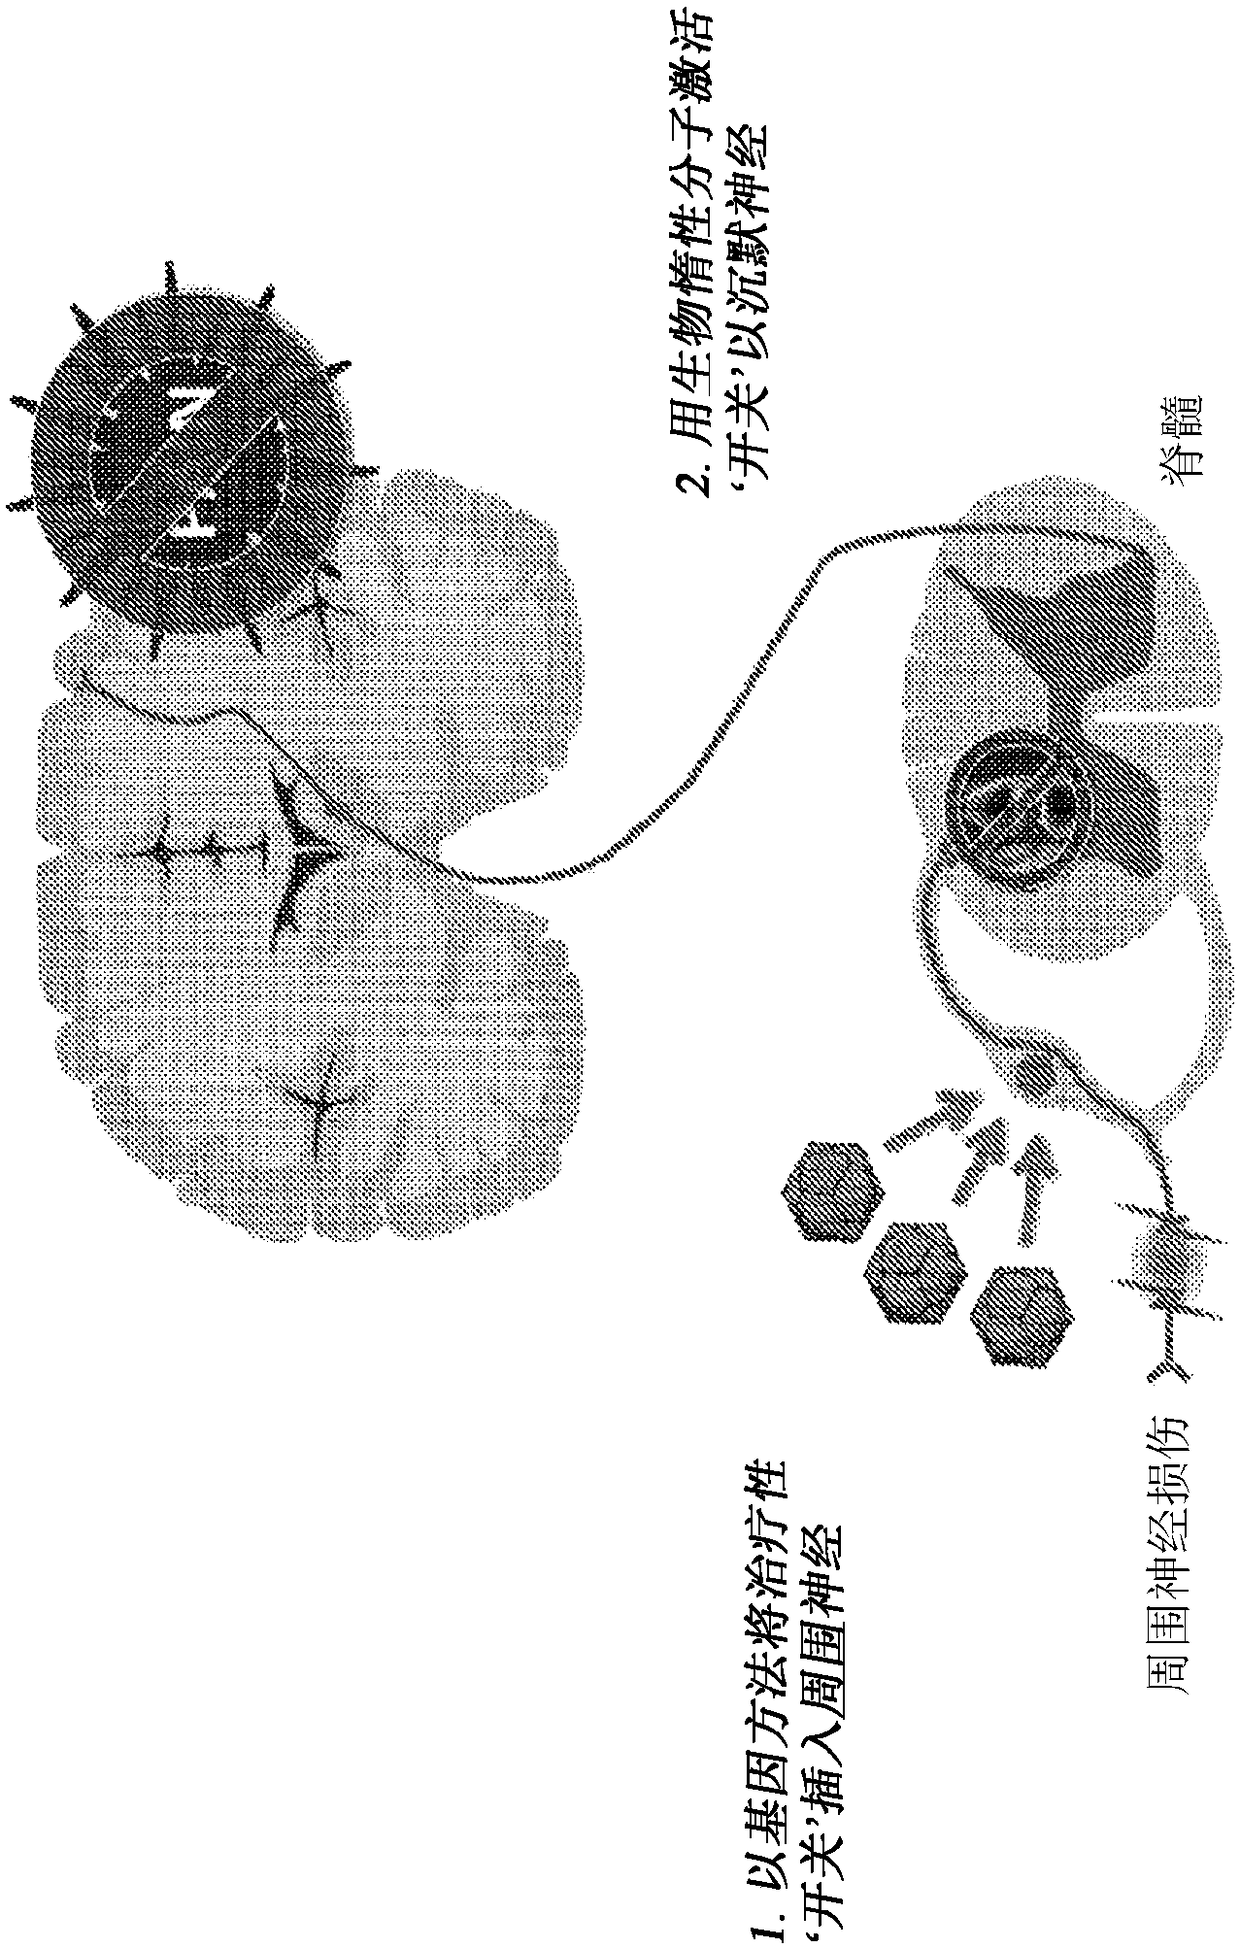 Compositions and methods for treating neurological disorders